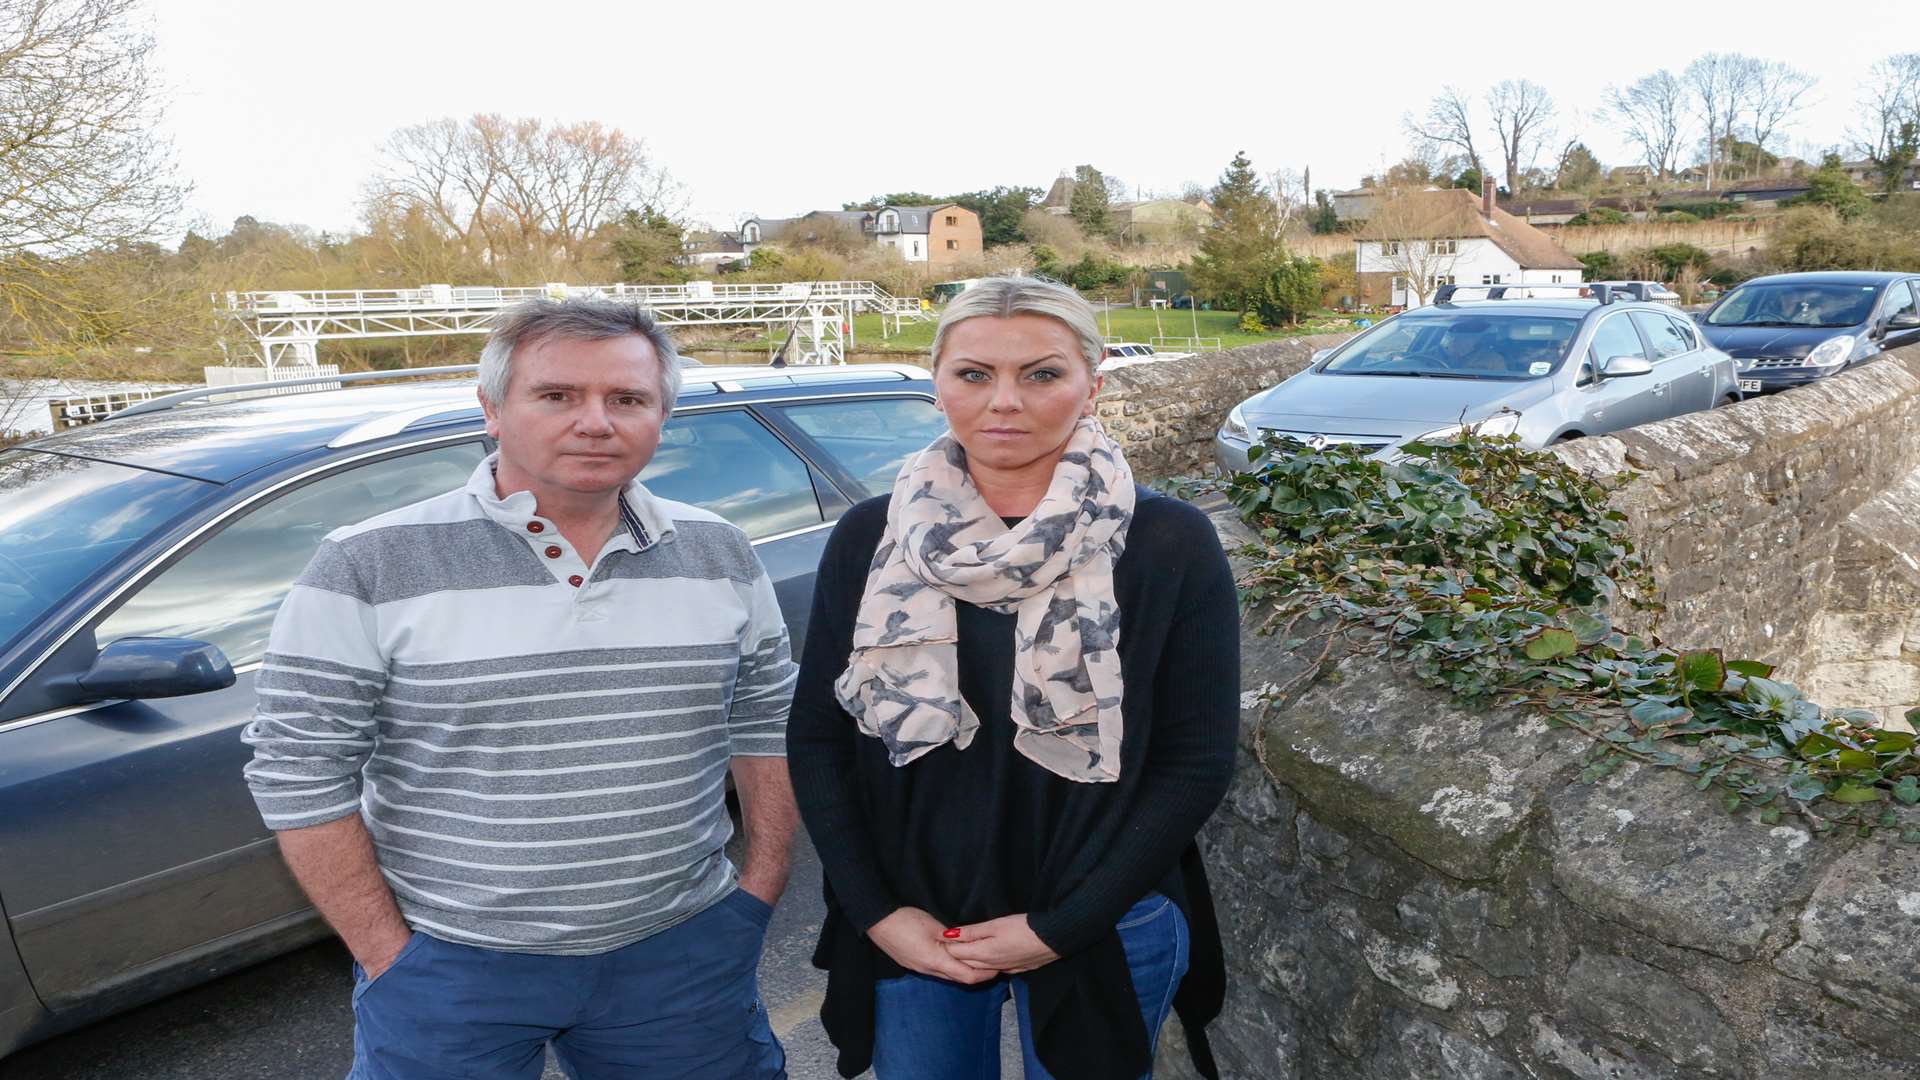 Residents Sarah Hobbs and Jeff Leahy at Farleigh Bridge in East Farleigh, calling for action to solve the traffic problems. Picture by Matthew Walker.